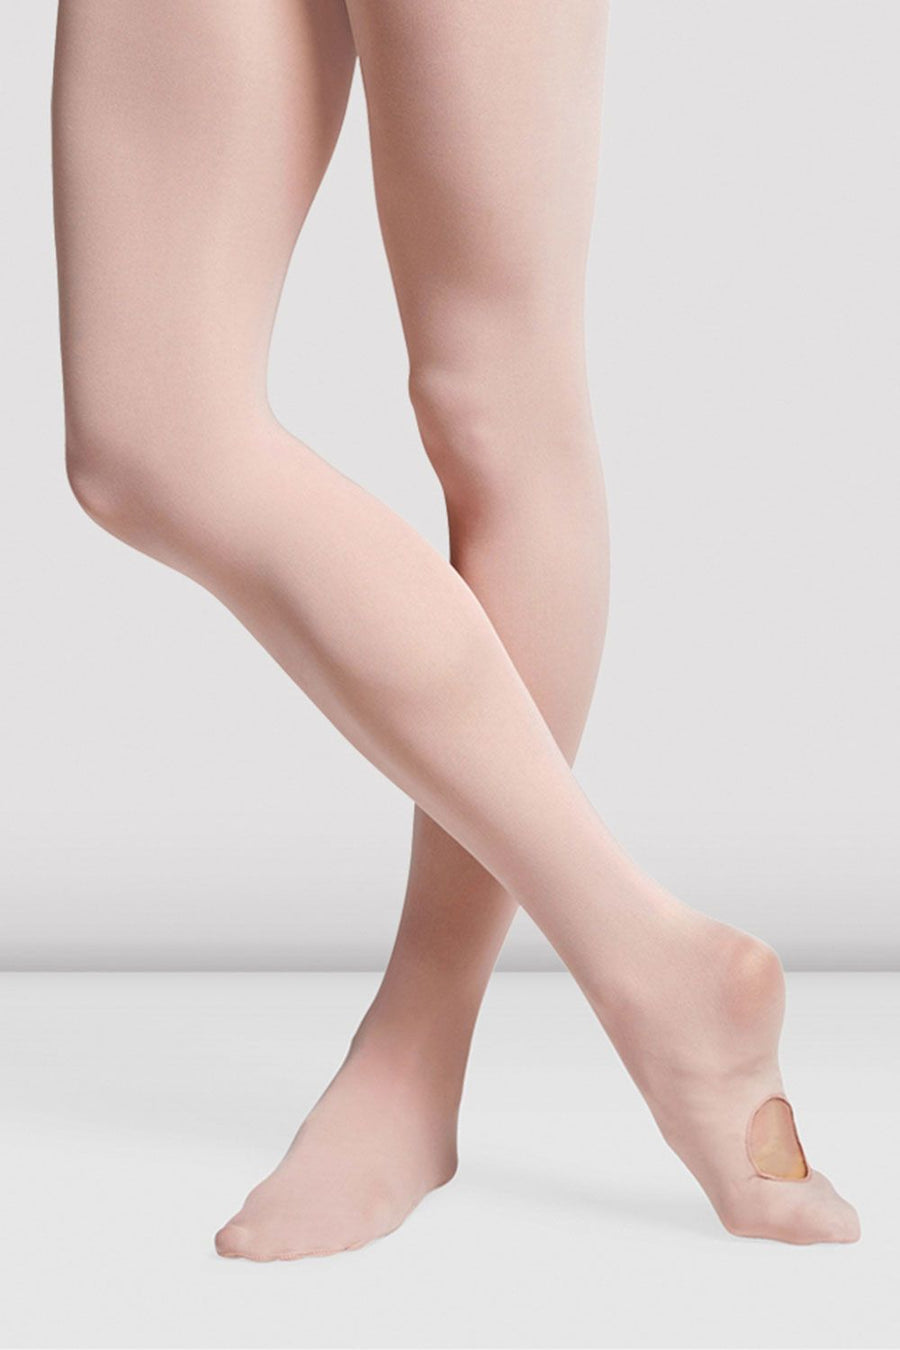 Bloch Girl's Convertible Tights